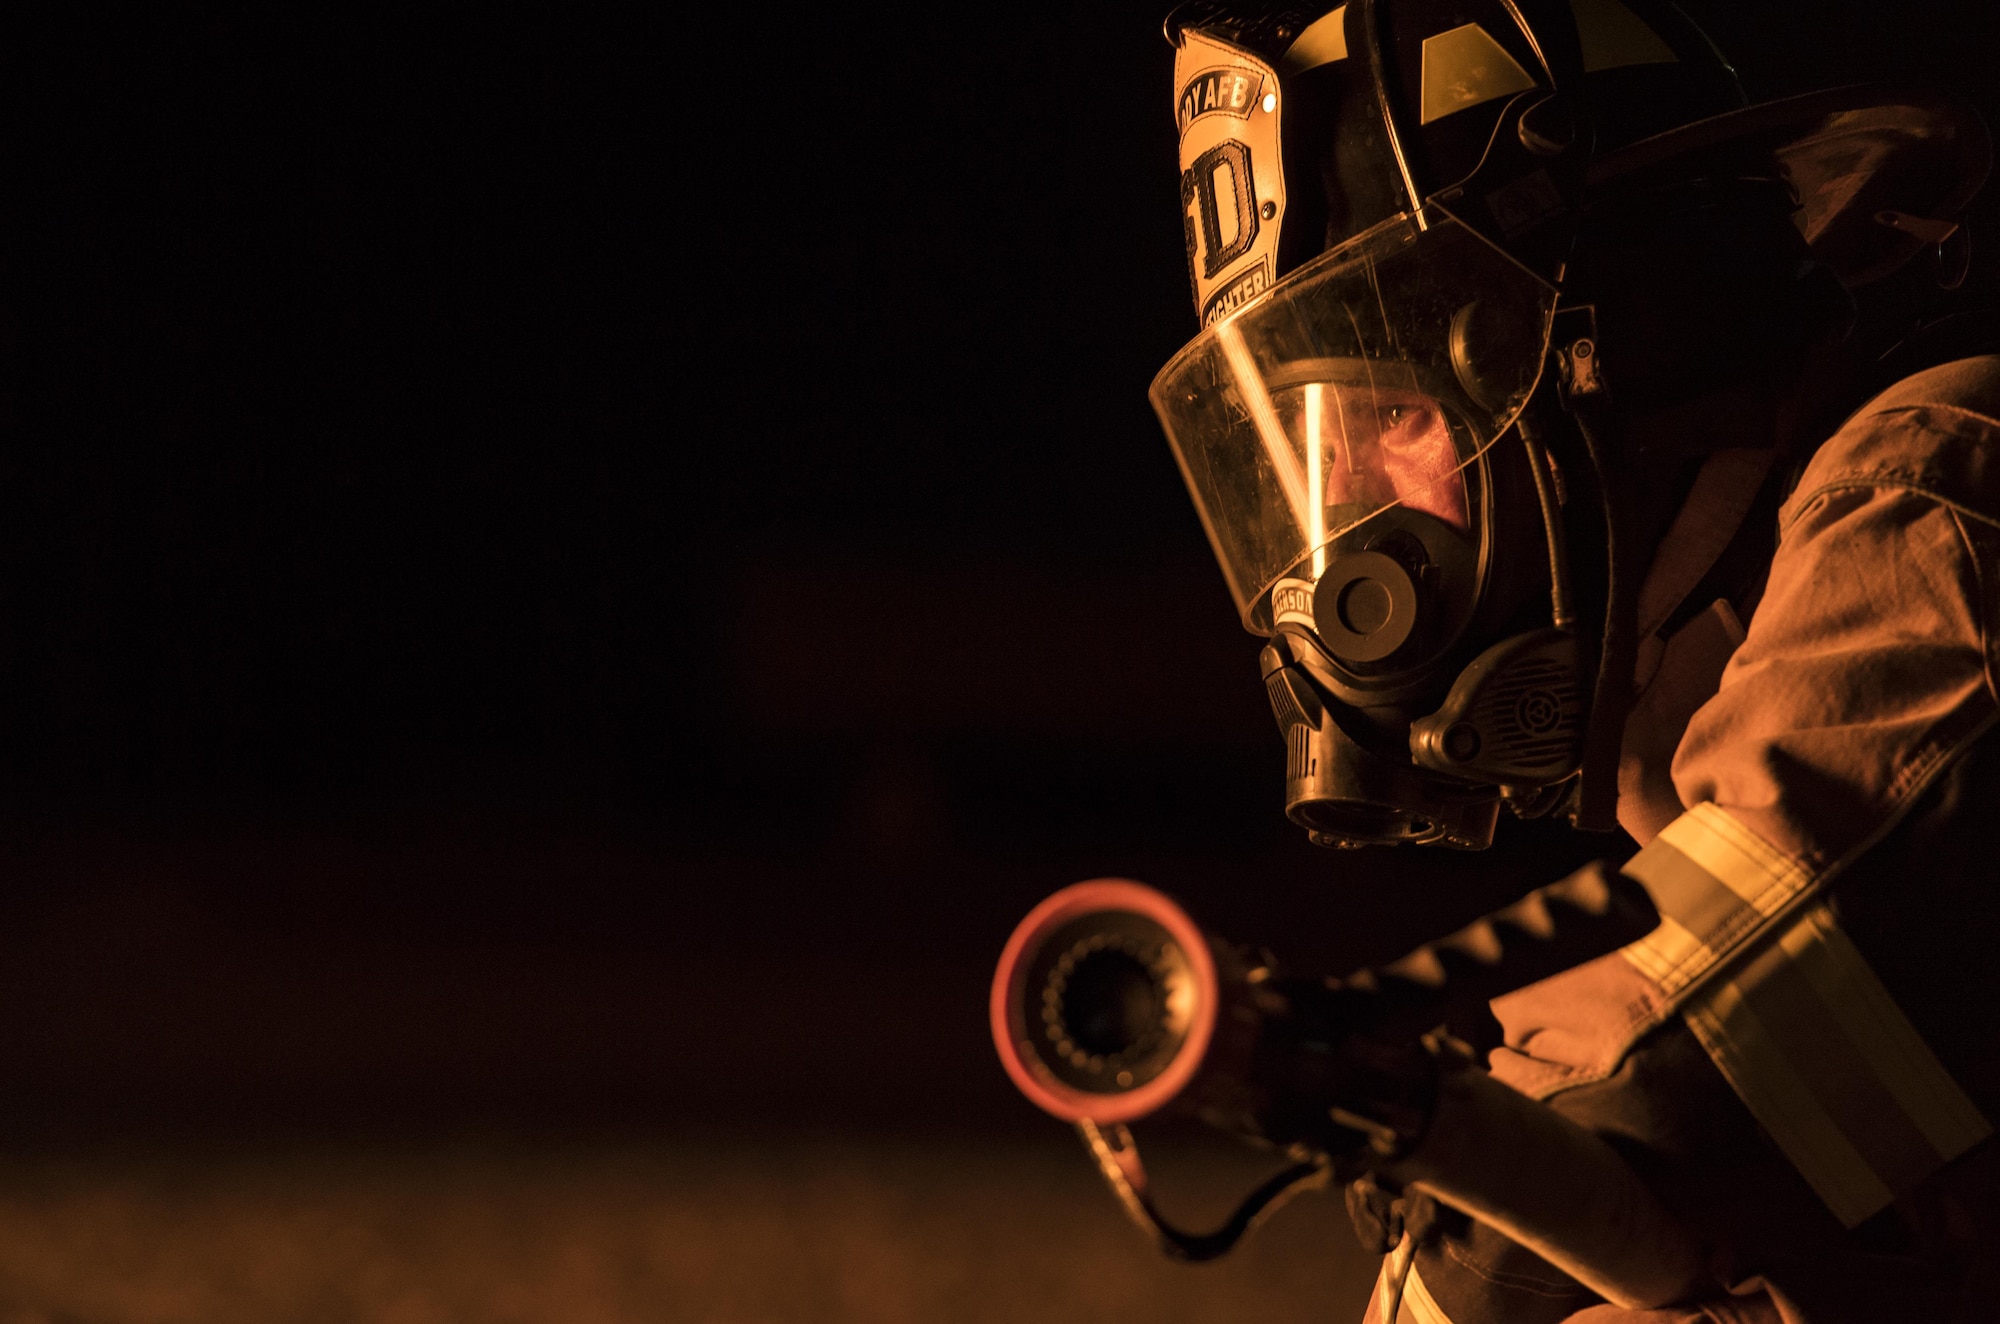 A firefighter from the 23d Civil Engineer Squadron watches his colleagues put out a fire during nighttime live-fire training, Nov. 9, 2017, at Moody Air Force Base, Ga. Moody and the Valdosta Fire Department joined forces to prepare for the possibility of nighttime aircraft fire operations. (U.S. Air Force photo by Senior Airman Janiqua P. Robinson)